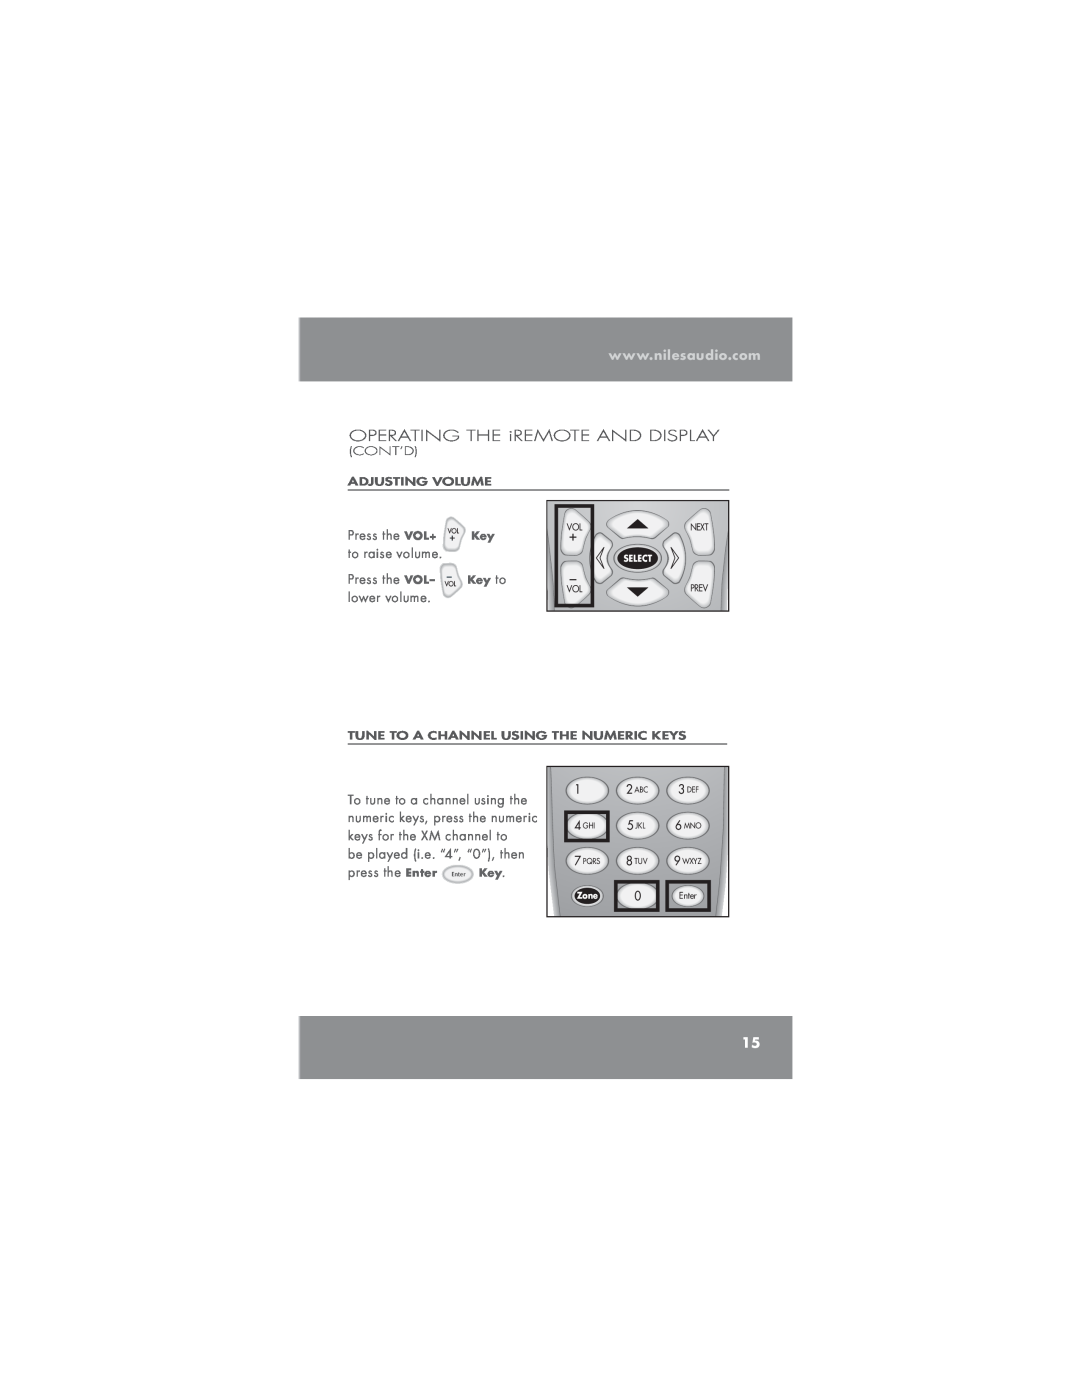 Niles Audio TM-XM manual OPERATING THE iREMOTE AND DISPLAY, Cont’D, 70 70, 4&-&$5, 13&7, Oufs 